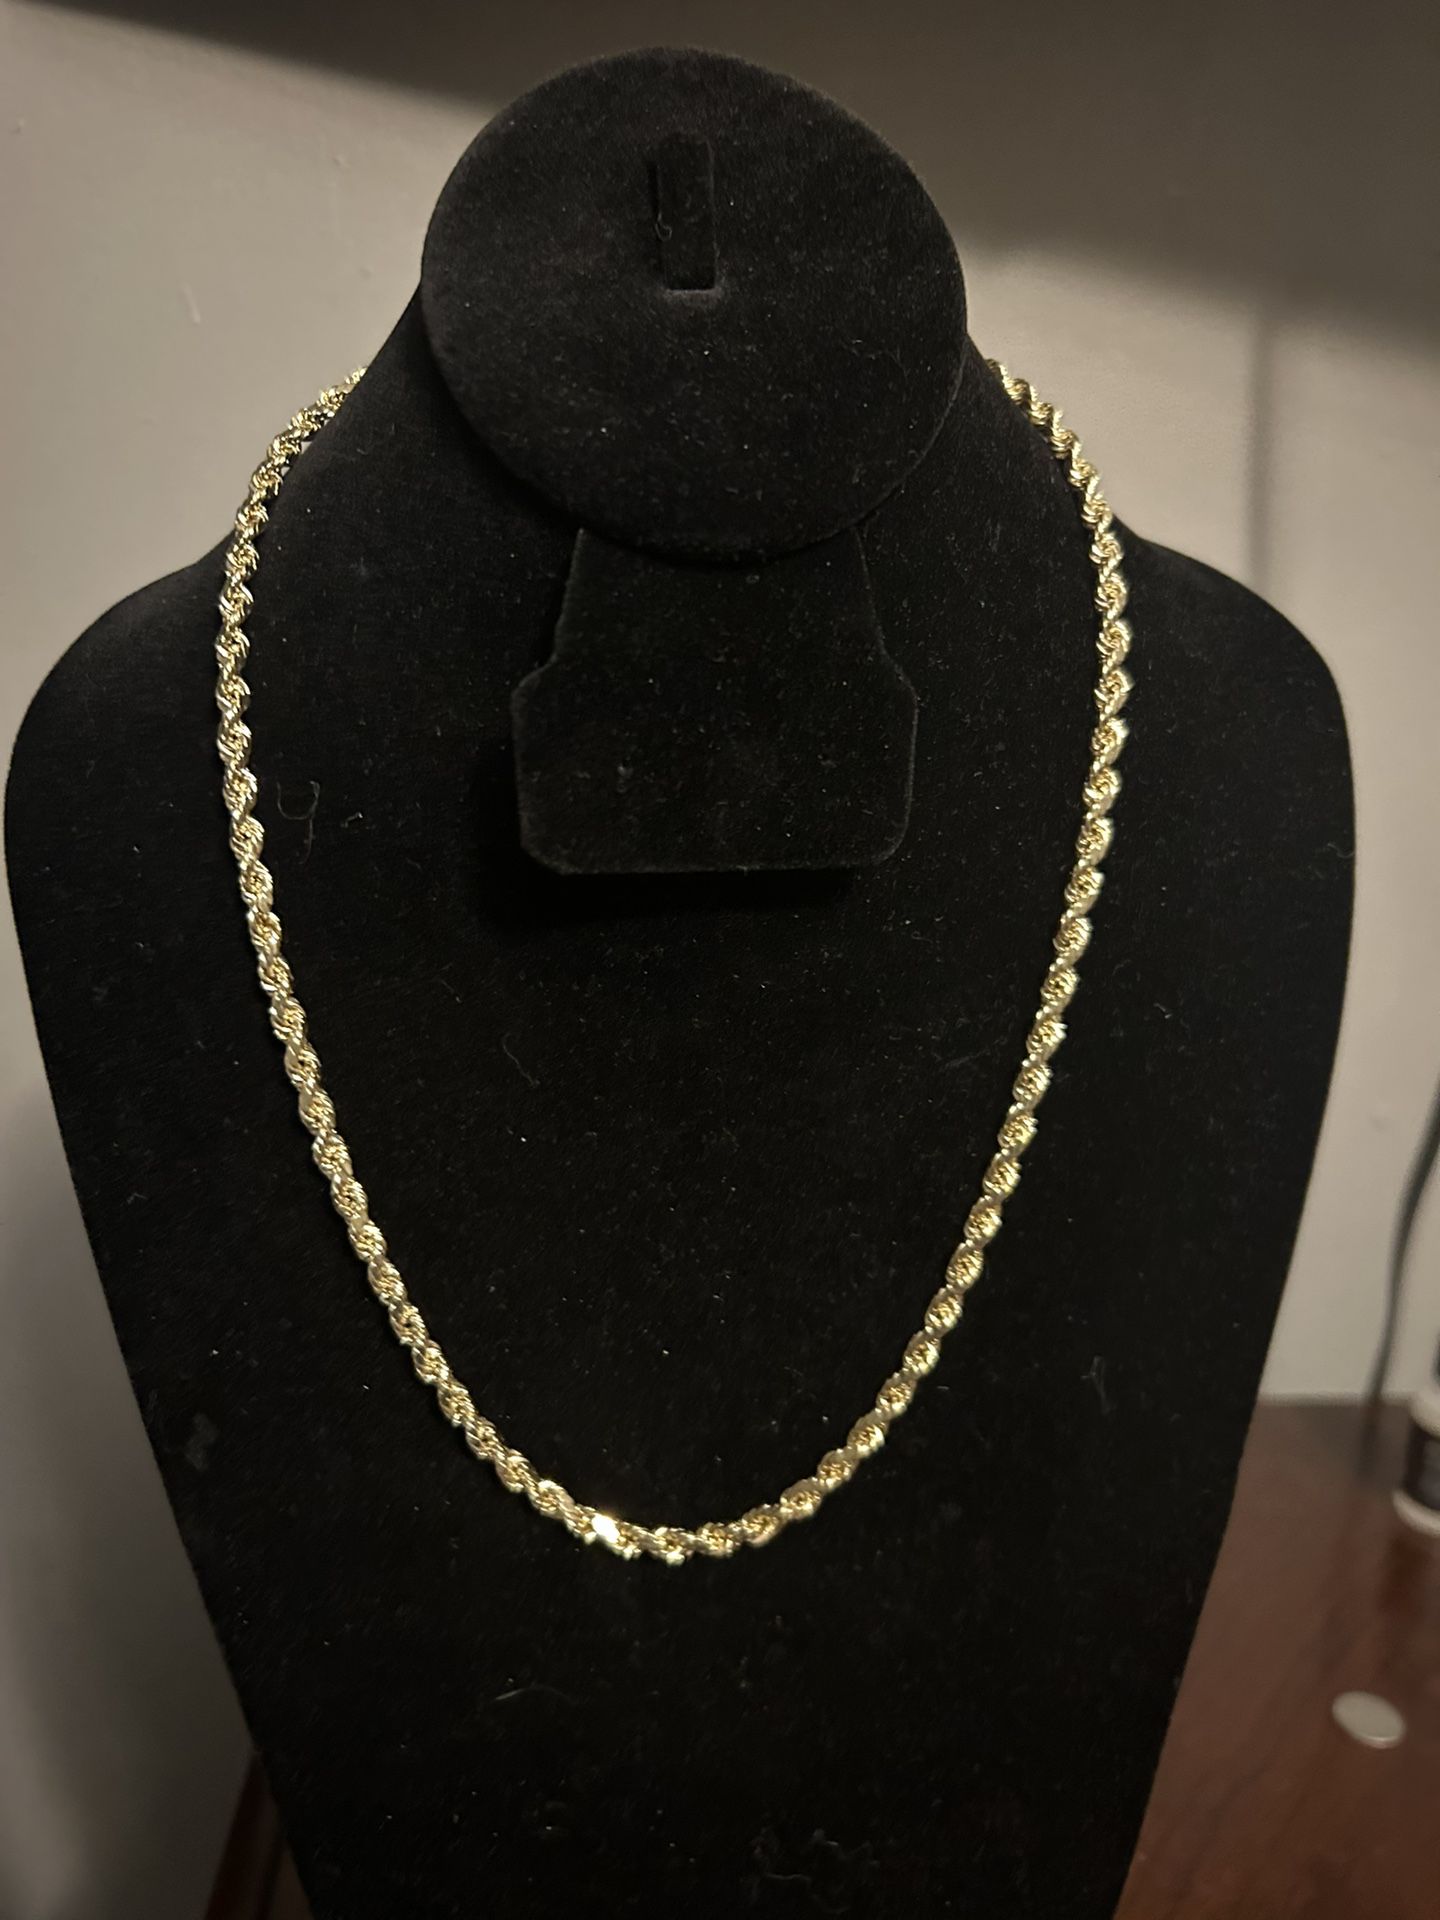 Gold Rope Chain Necklace 22 Inch 8.4 Grams Hollow 